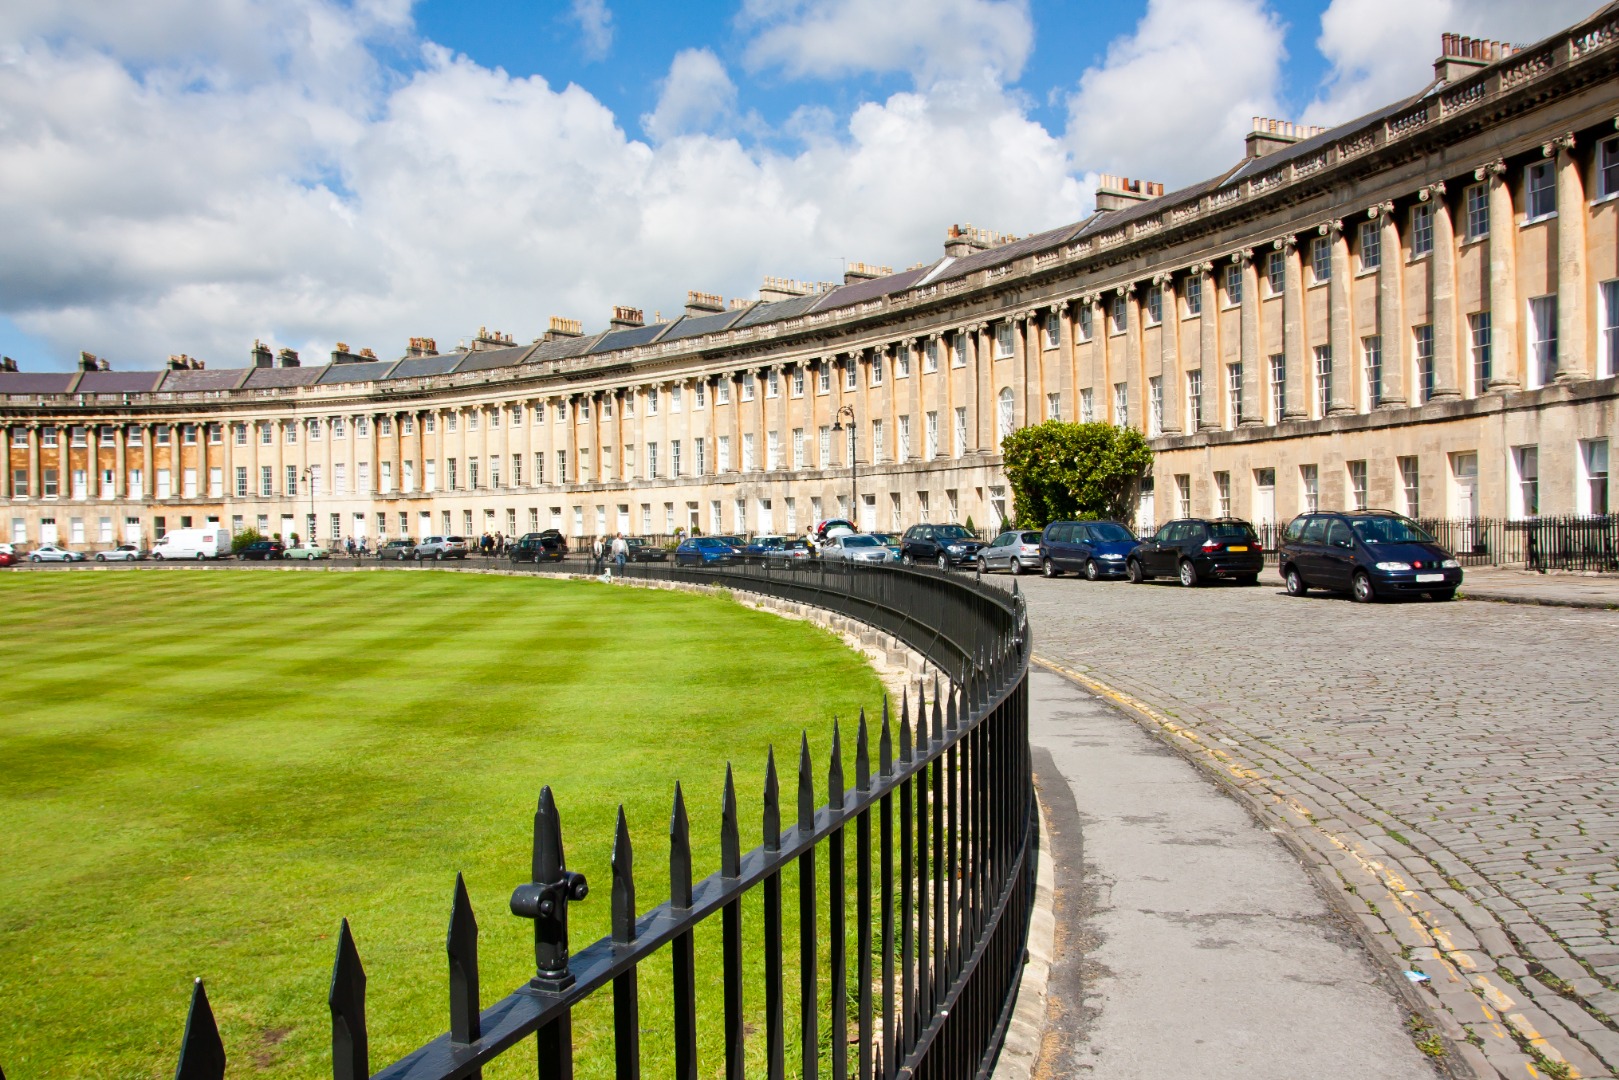 things to see in bath